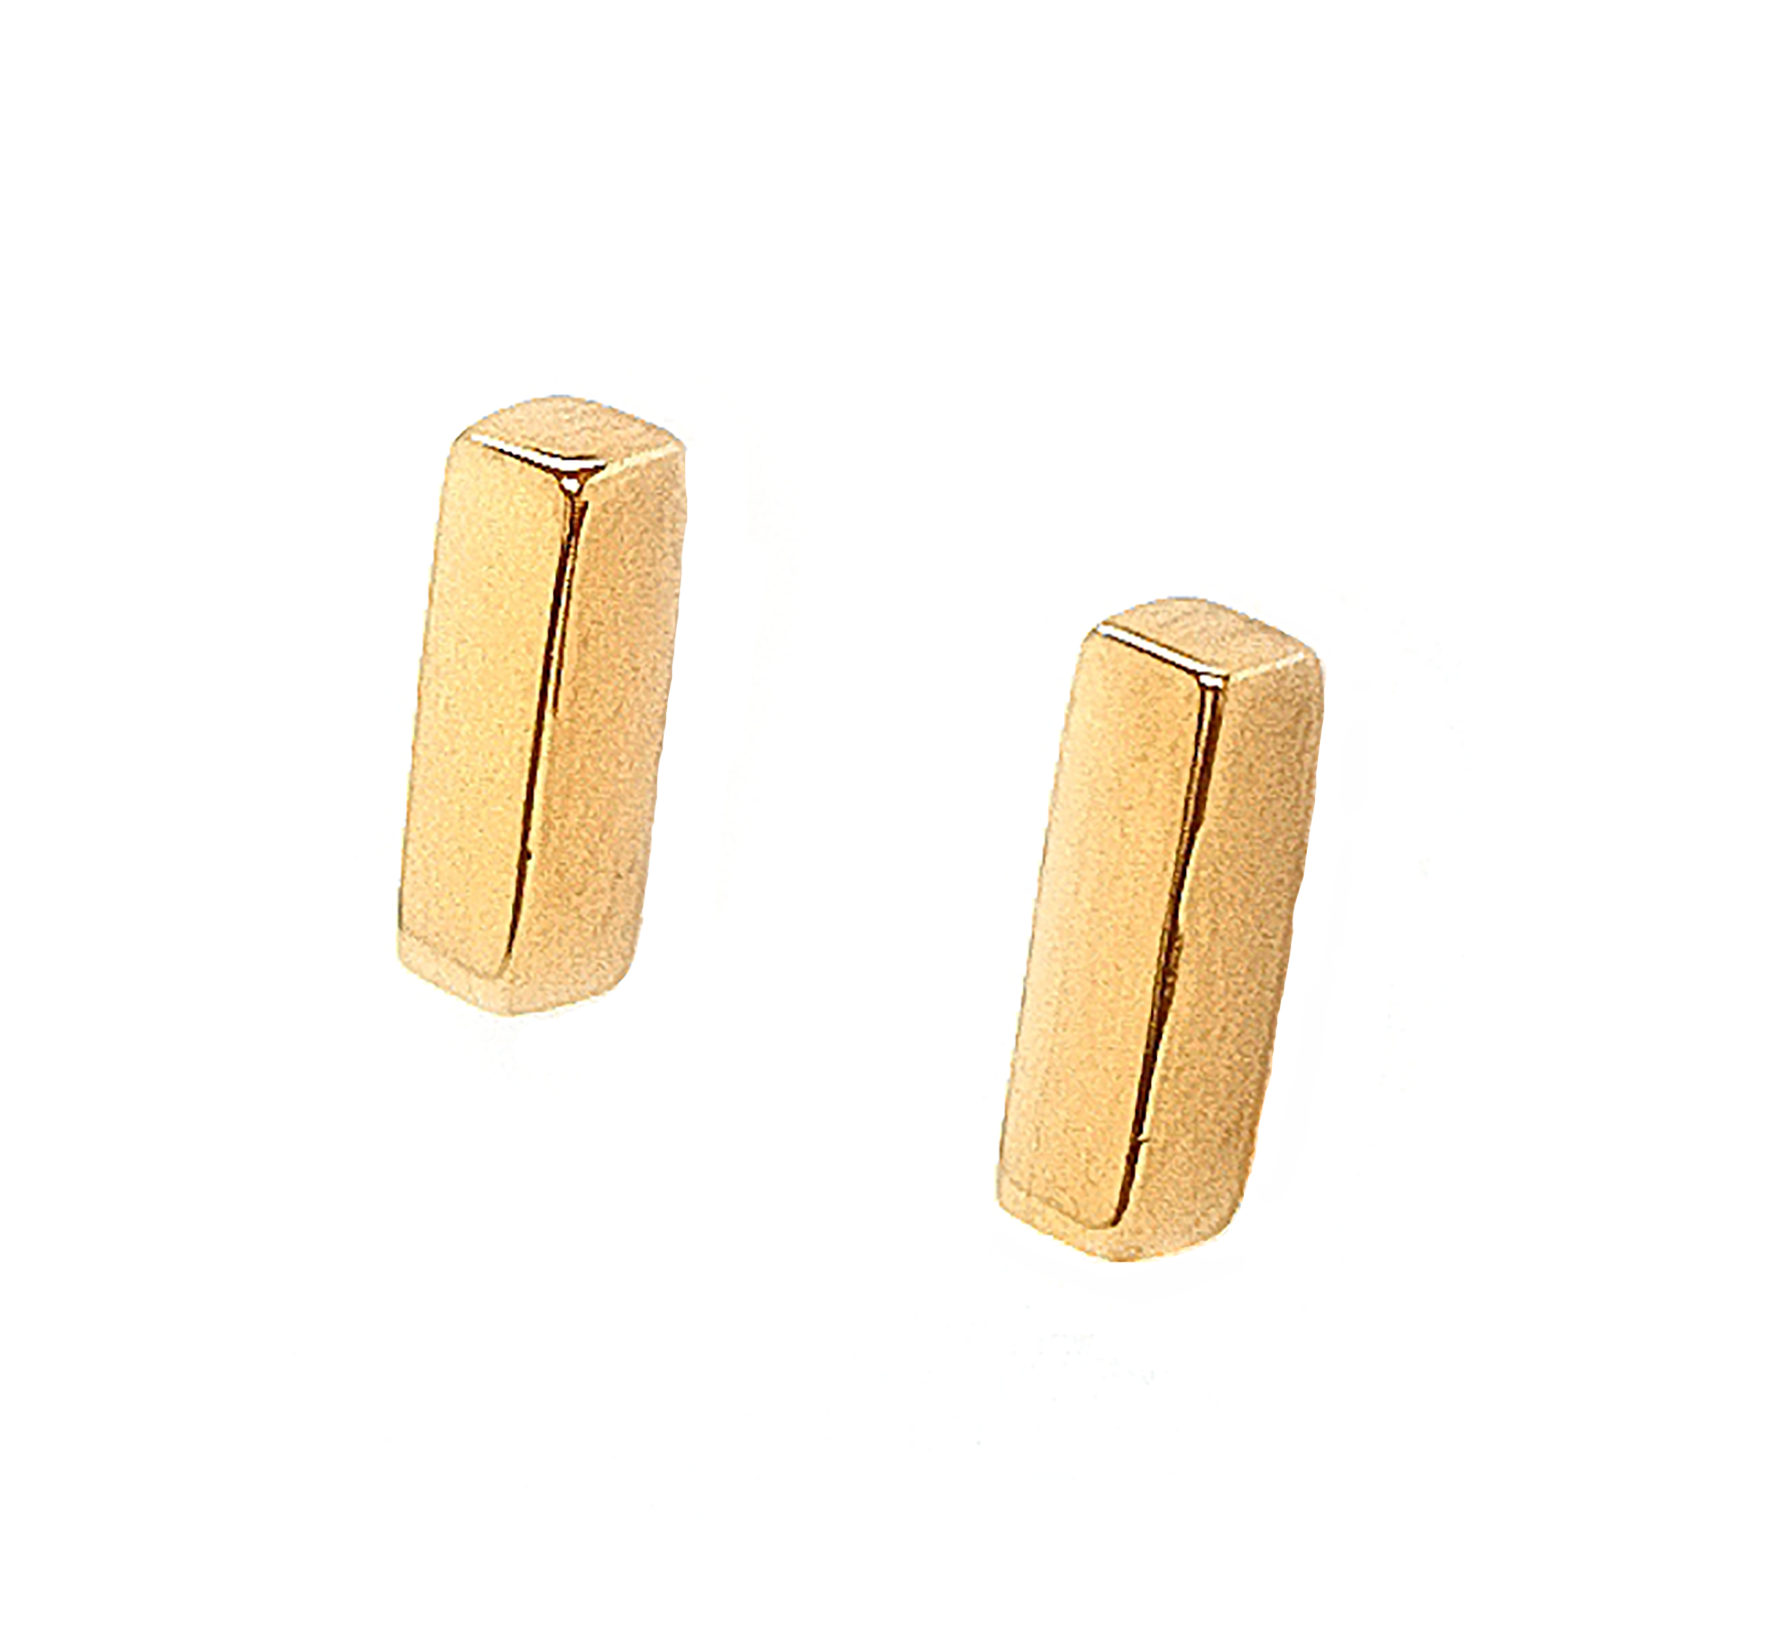 Silver Yellow Gold Plated Polished Rectangular Cube Stud Earrings